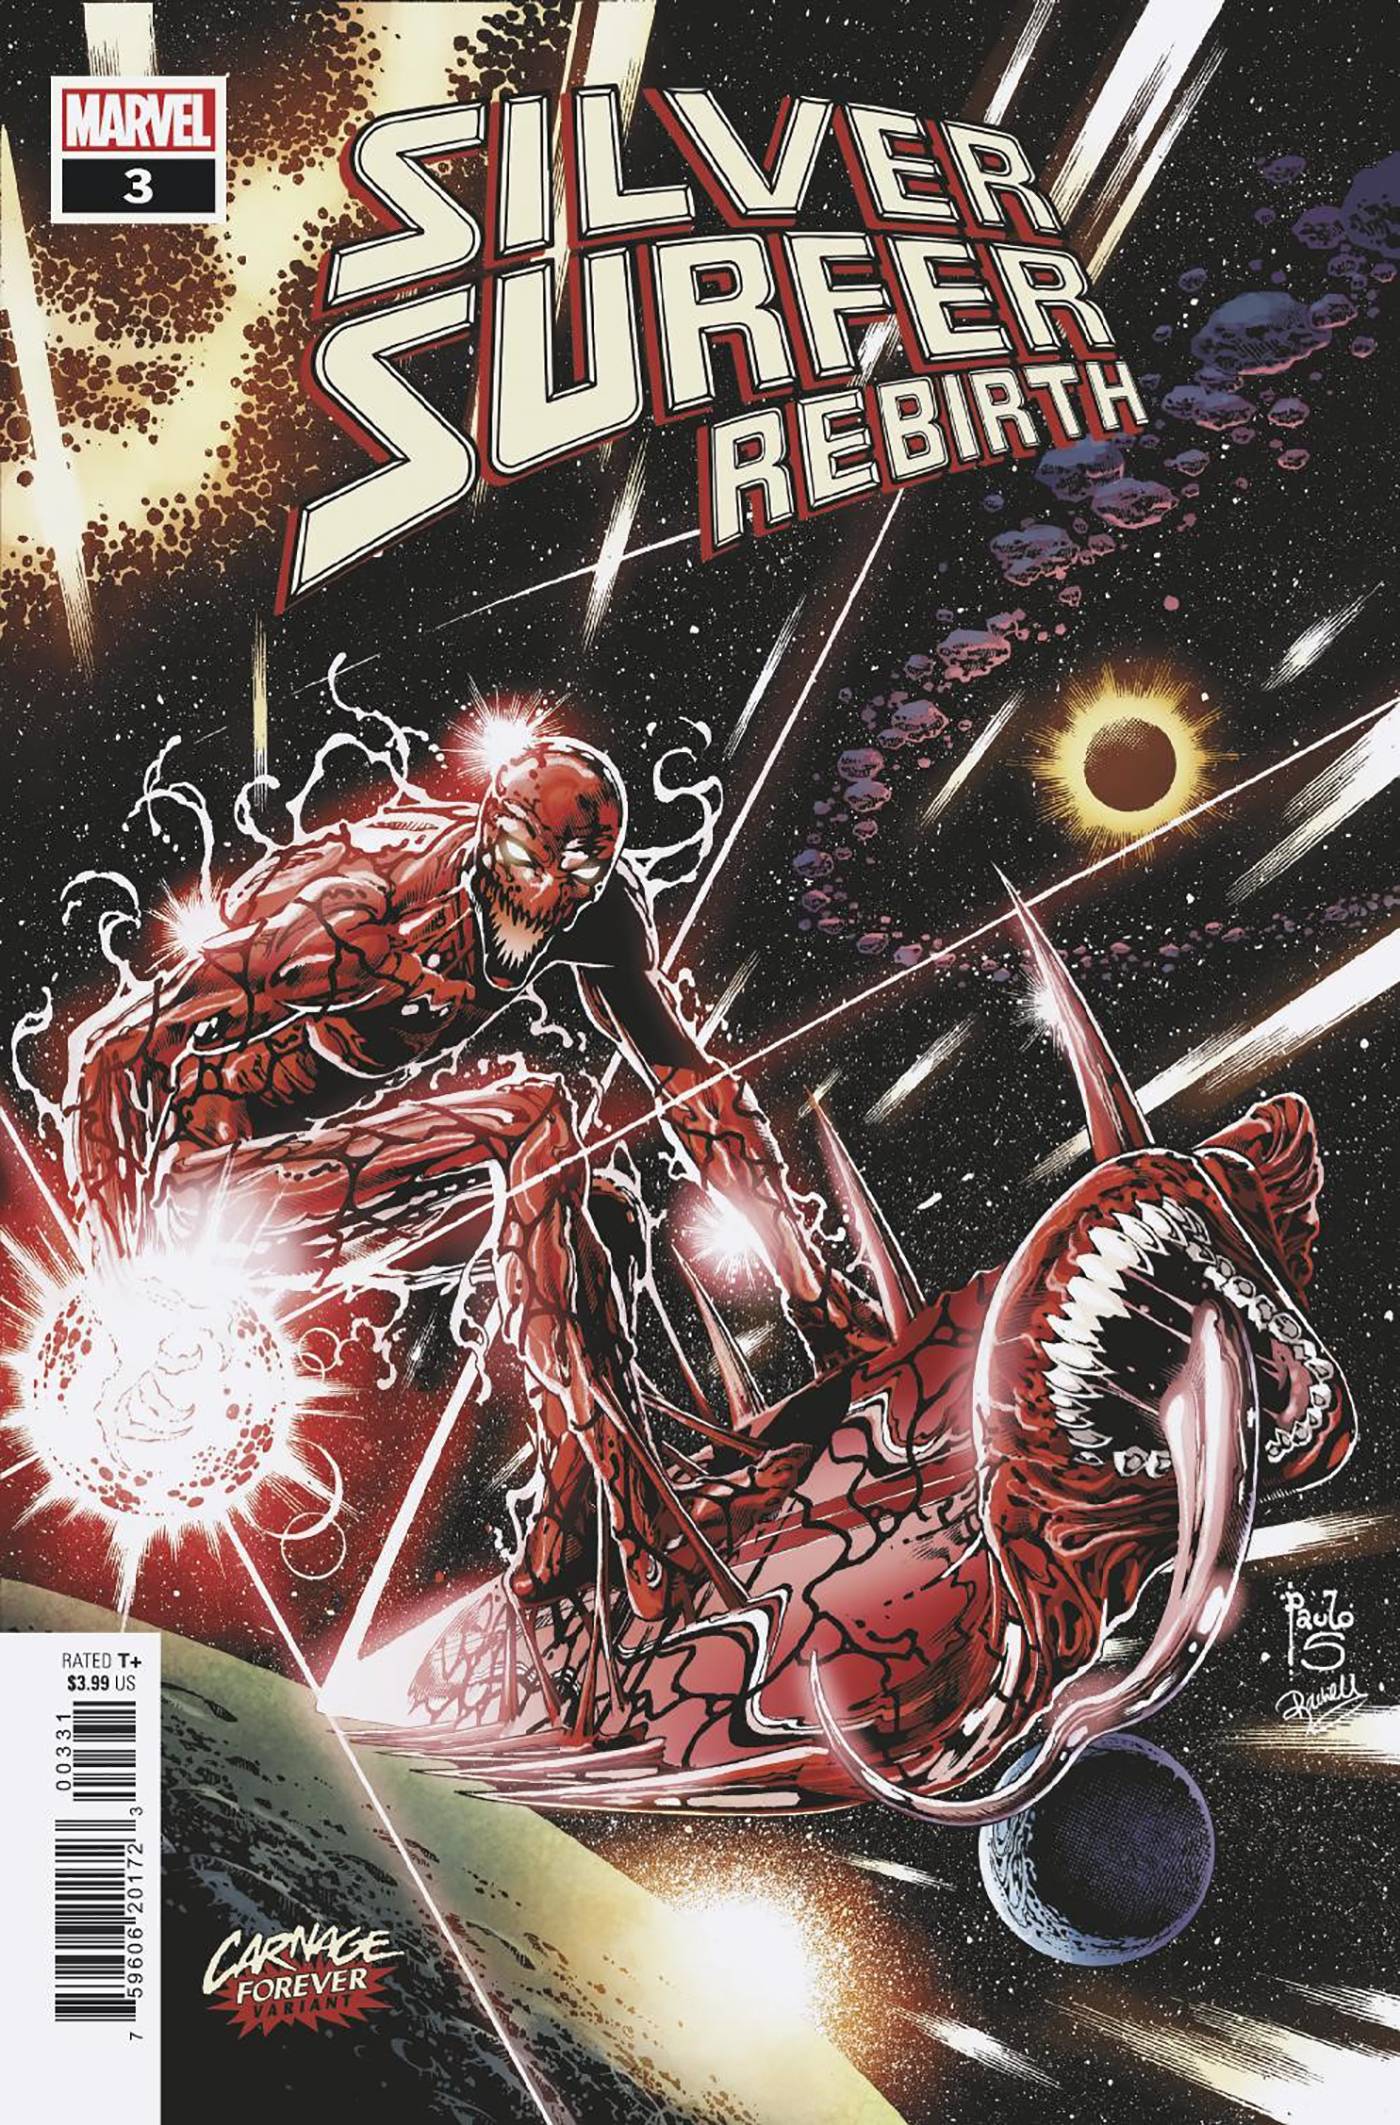 03/30/2022 SILVER SURFER REBIRTH #3 (OF 5) SIQUERA CARNAGE FOREVER VARIANT